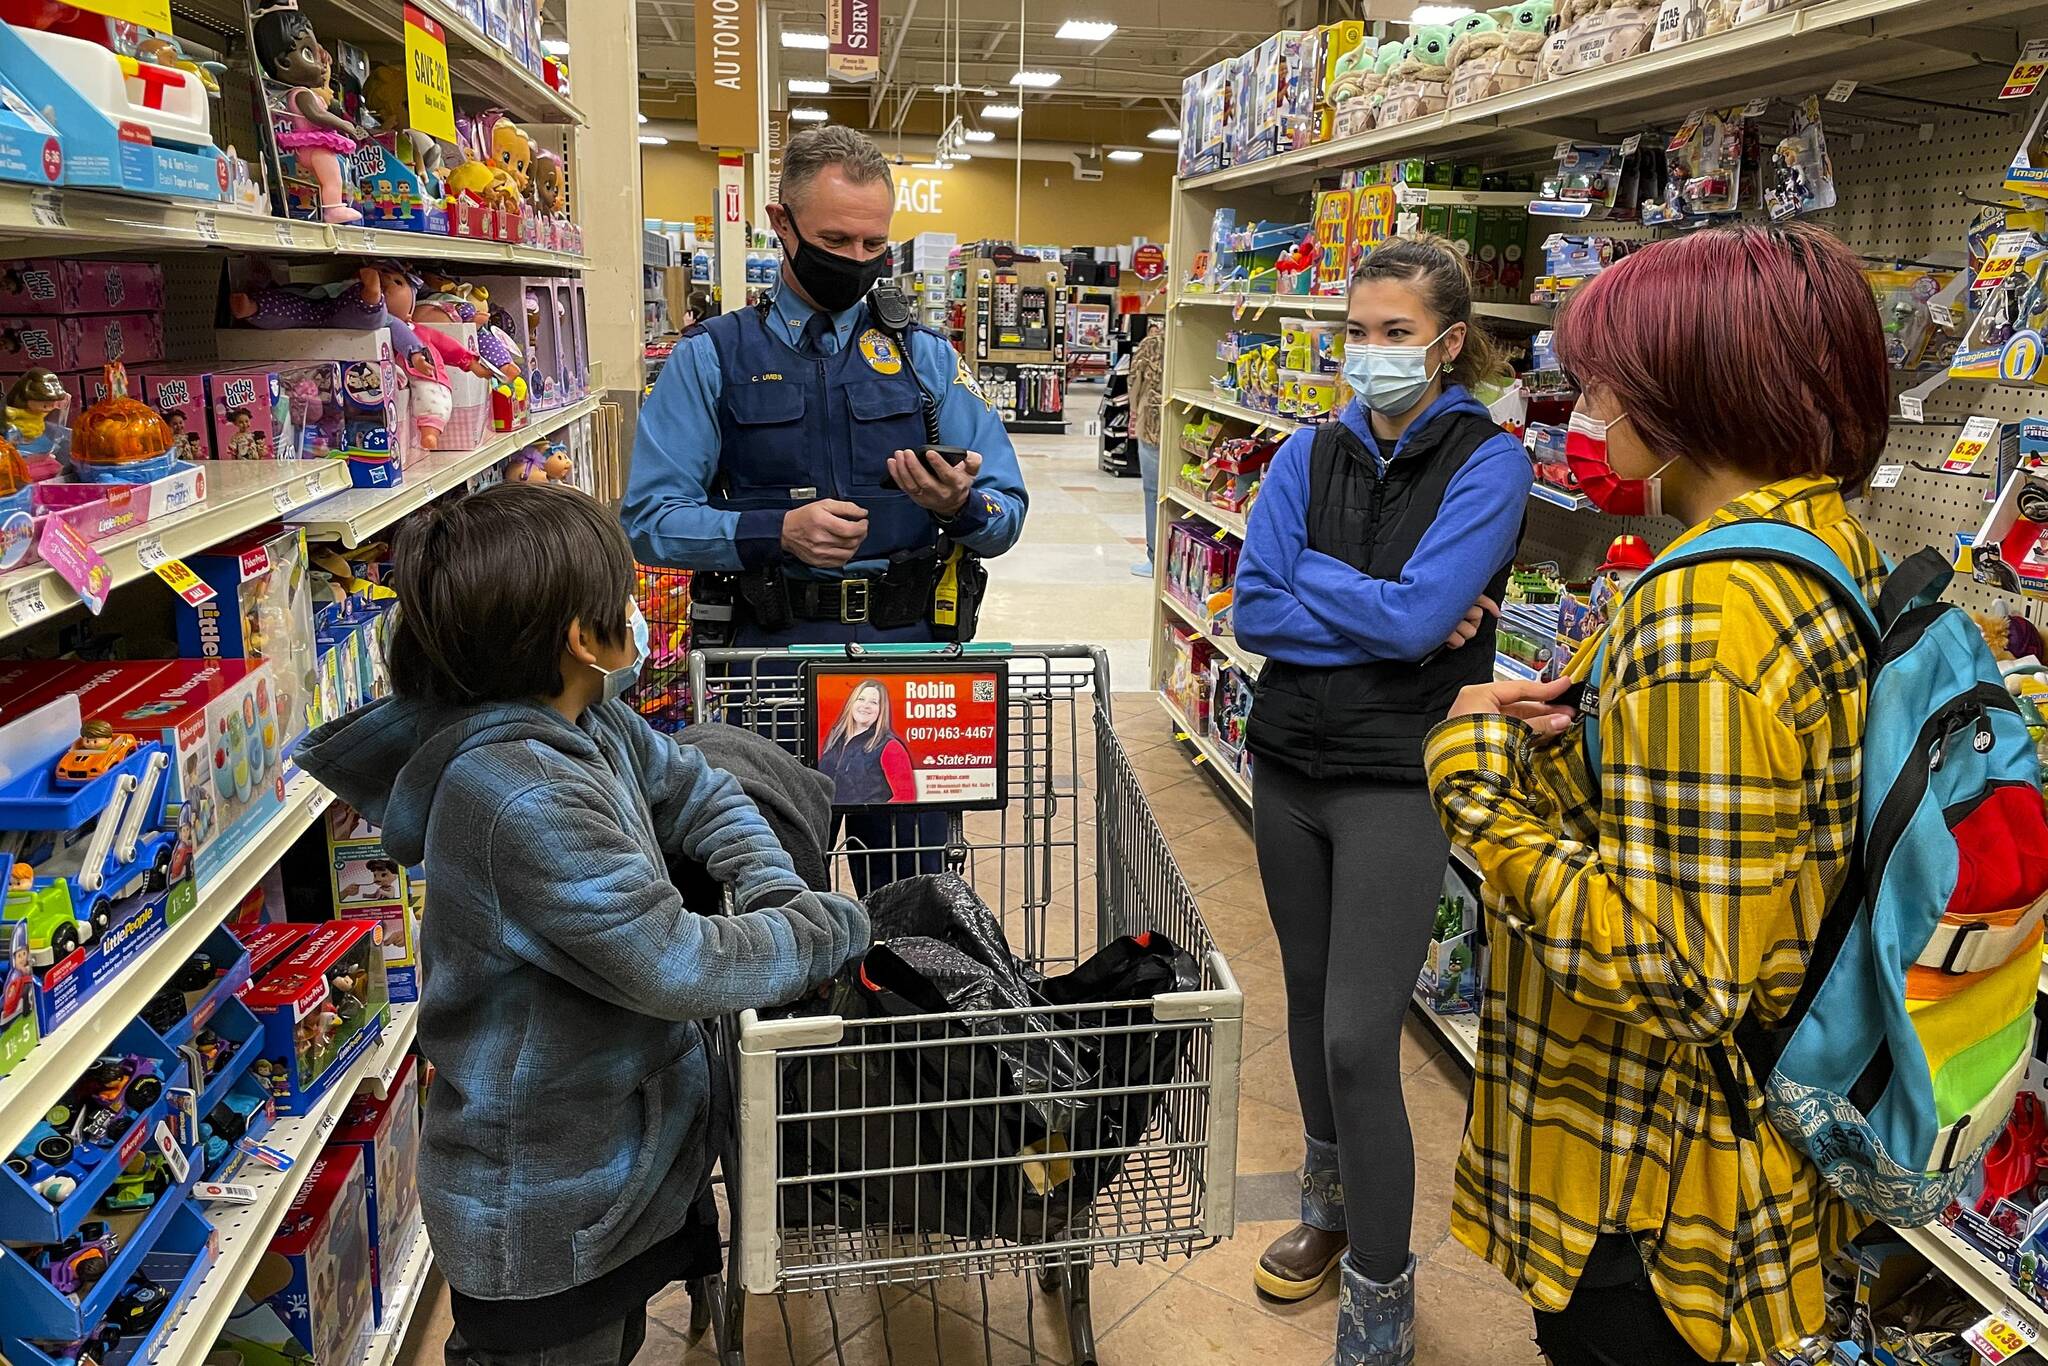 Alaska State Trooper Chris Umbs and Victoria Larson talk to Ethan and Wilbur during the annual Shop with a Cop Event at Fred Meyer on Dec. 18, 2021. (Michael S. Lockett / Juneau Empire)